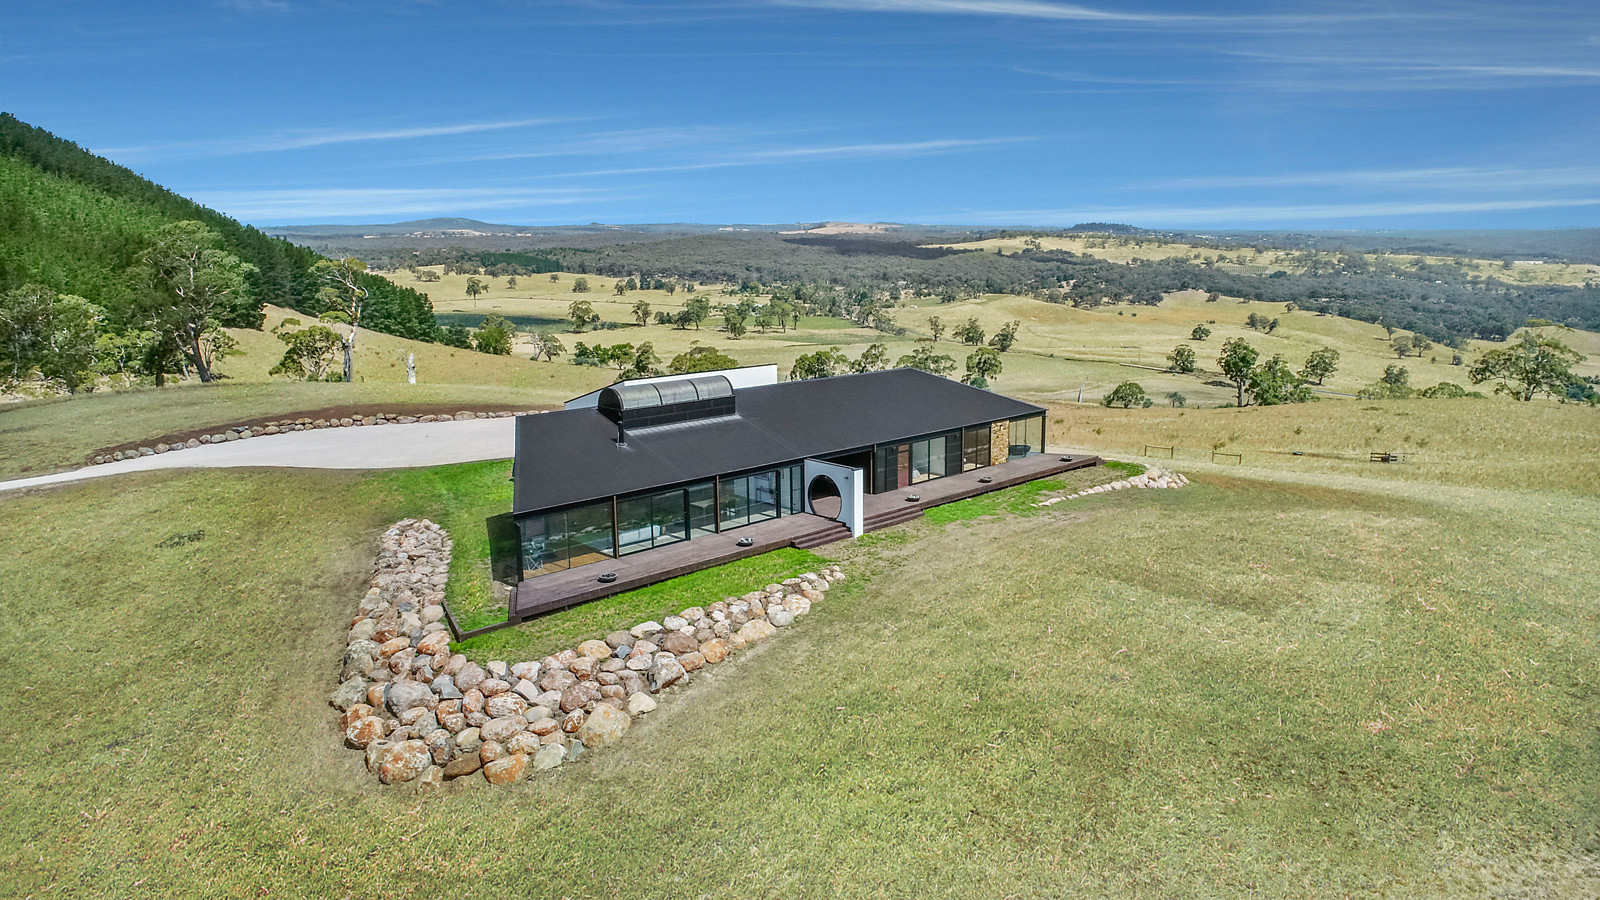 Secluded home at the base of a volcano is up for auction in Victoria, Australia